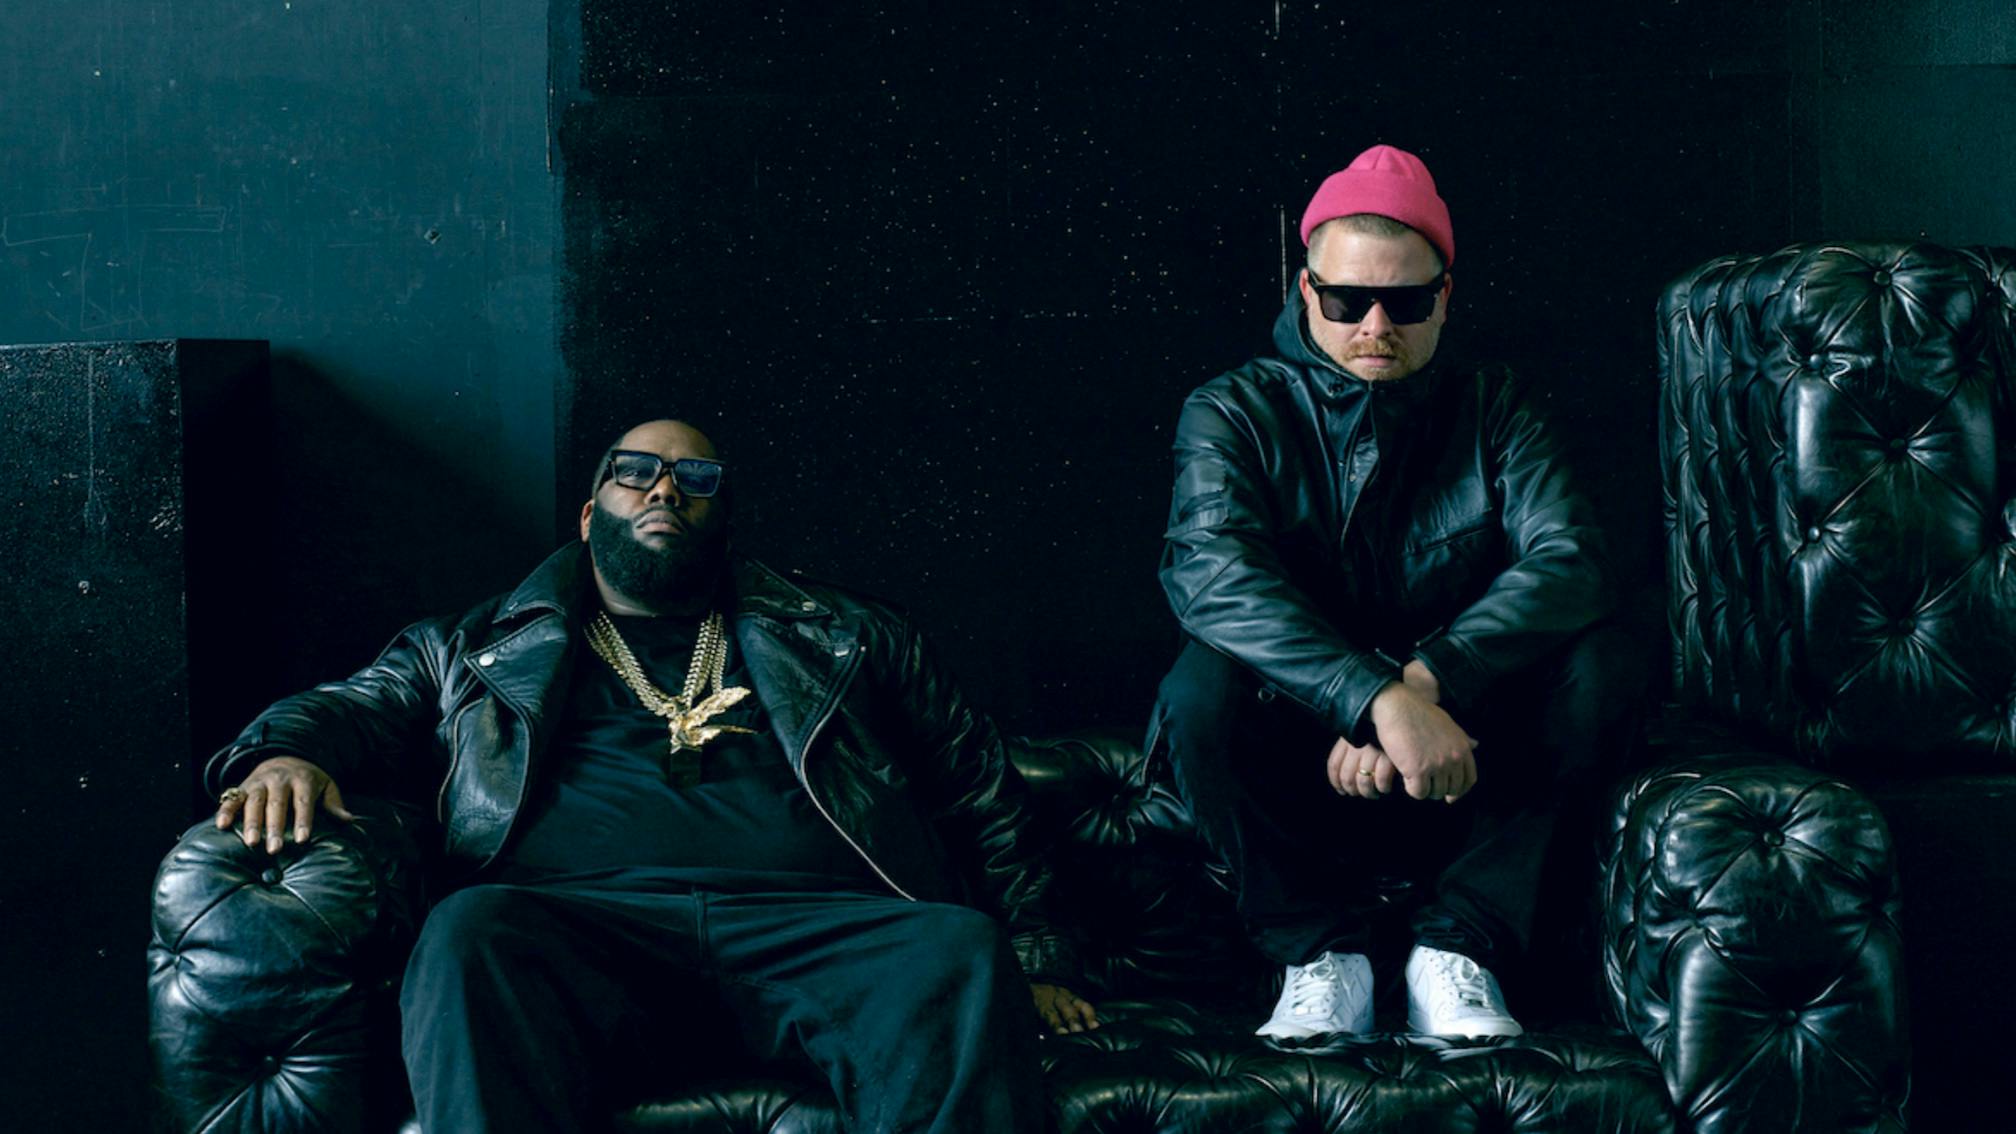 Run The Jewels Collaborate With Royal Blood On the ground below